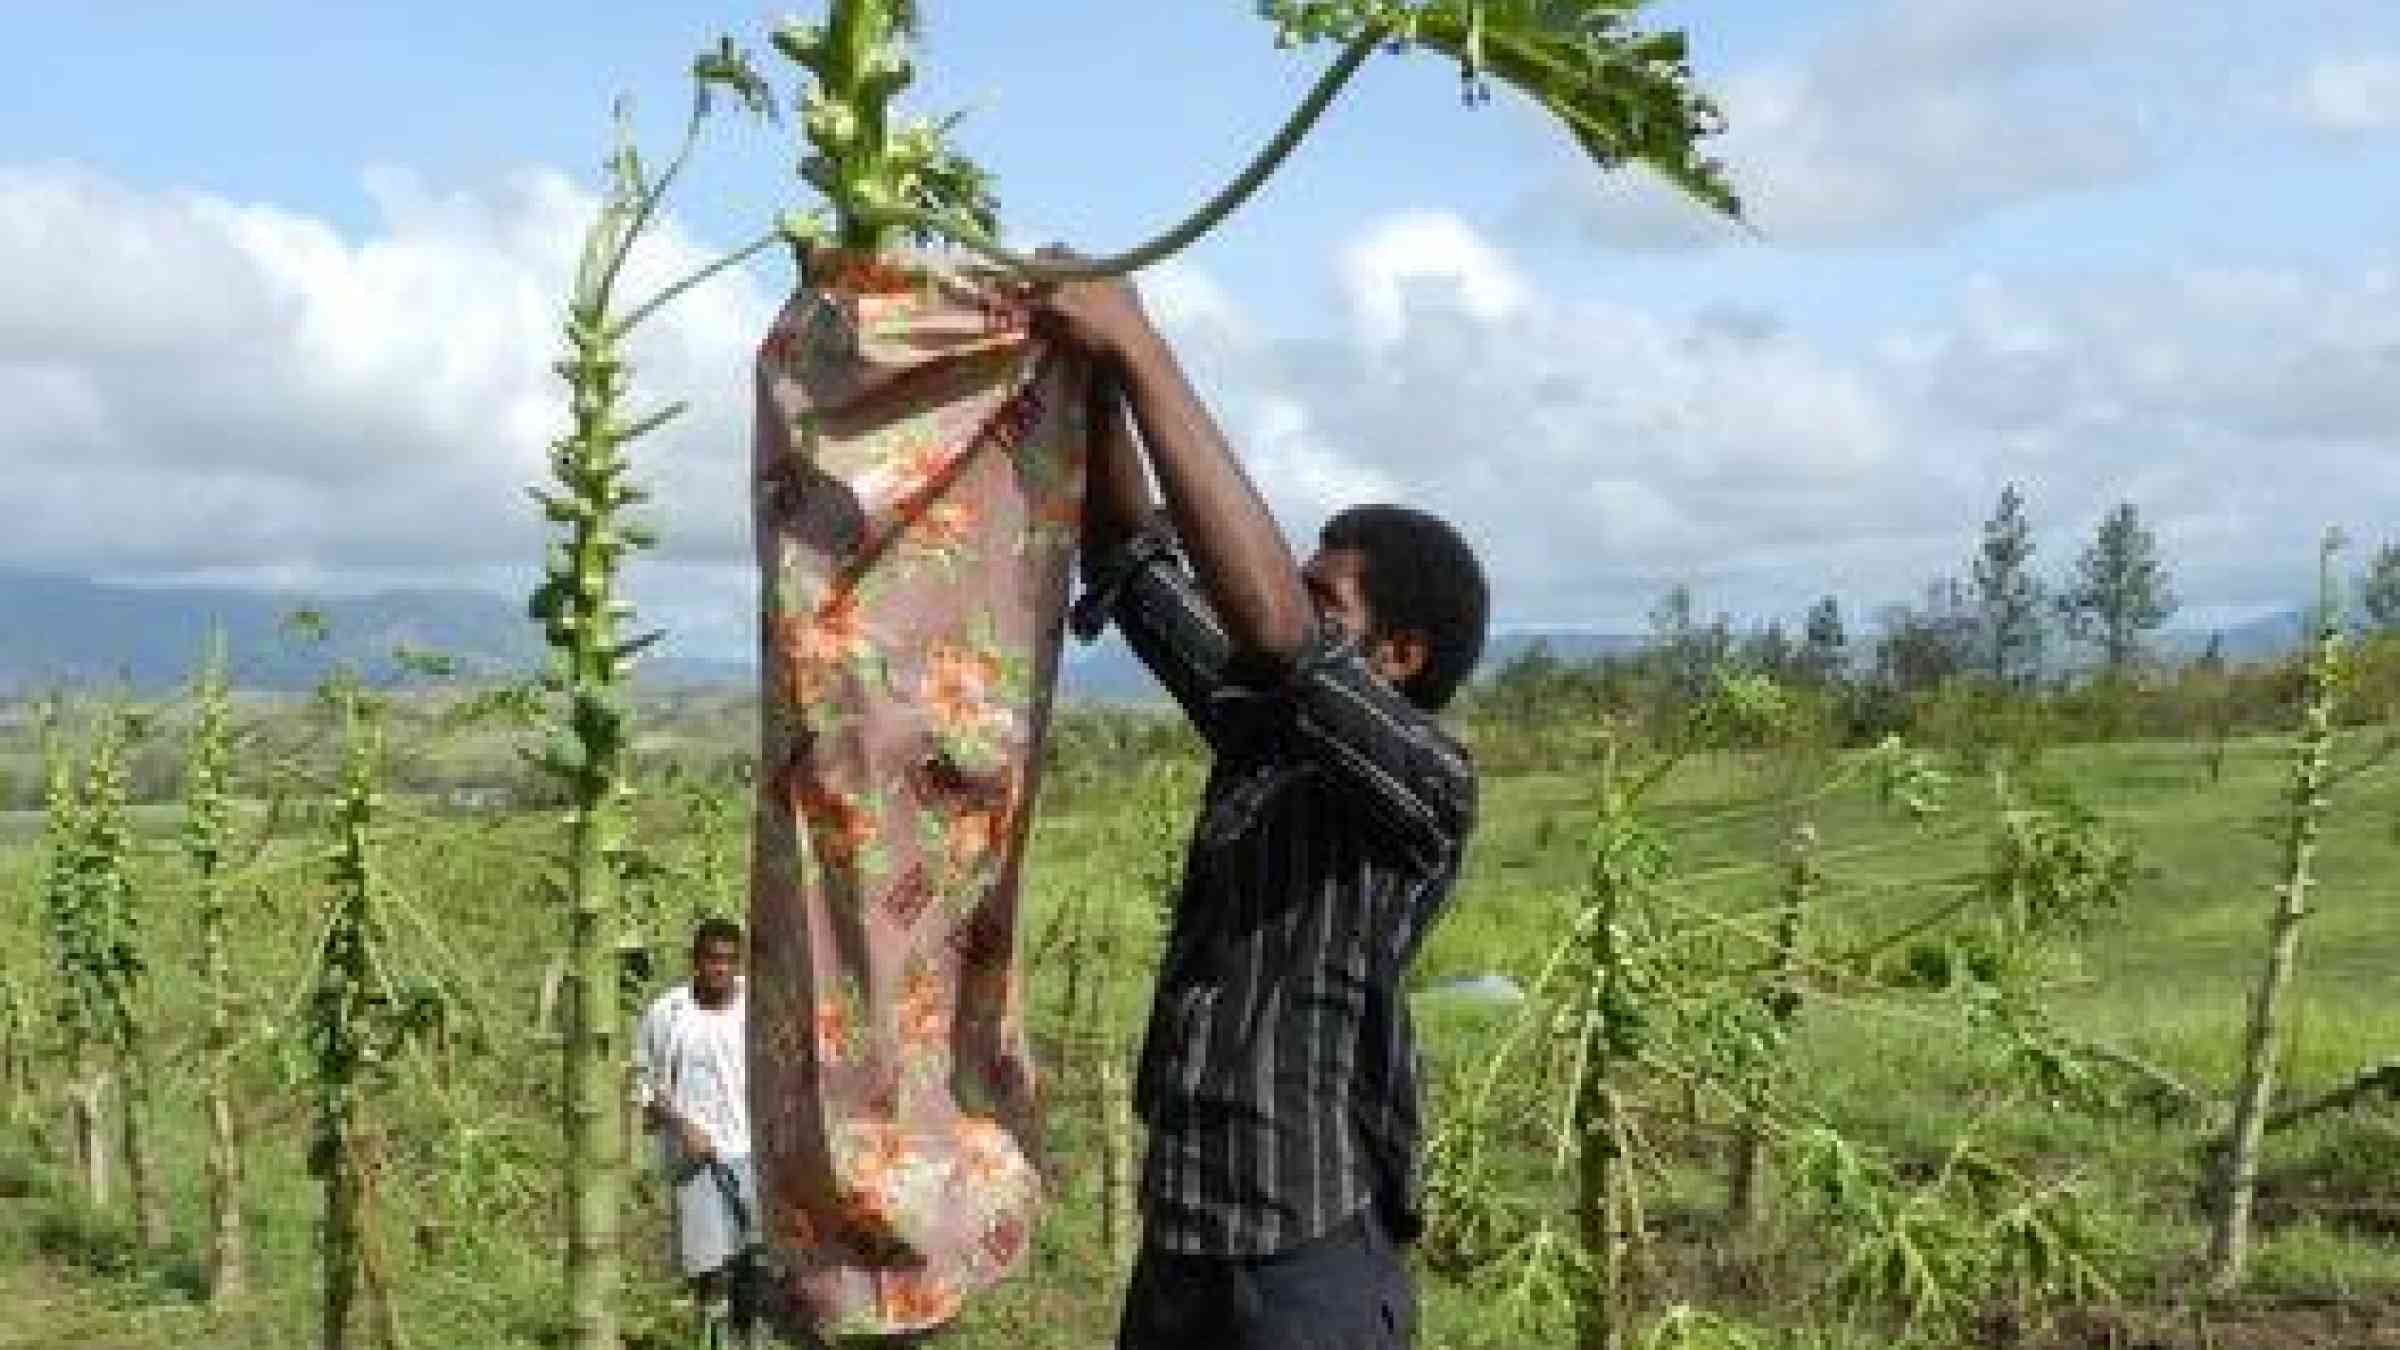 Beleaguered papaya farmers in Fiji who were pushed to near bankruptcy in the aftermath of Cyclone Evan in 2012 have changed their agriculture practices to build a more resilient business sector (Photo: Kyle Stice).